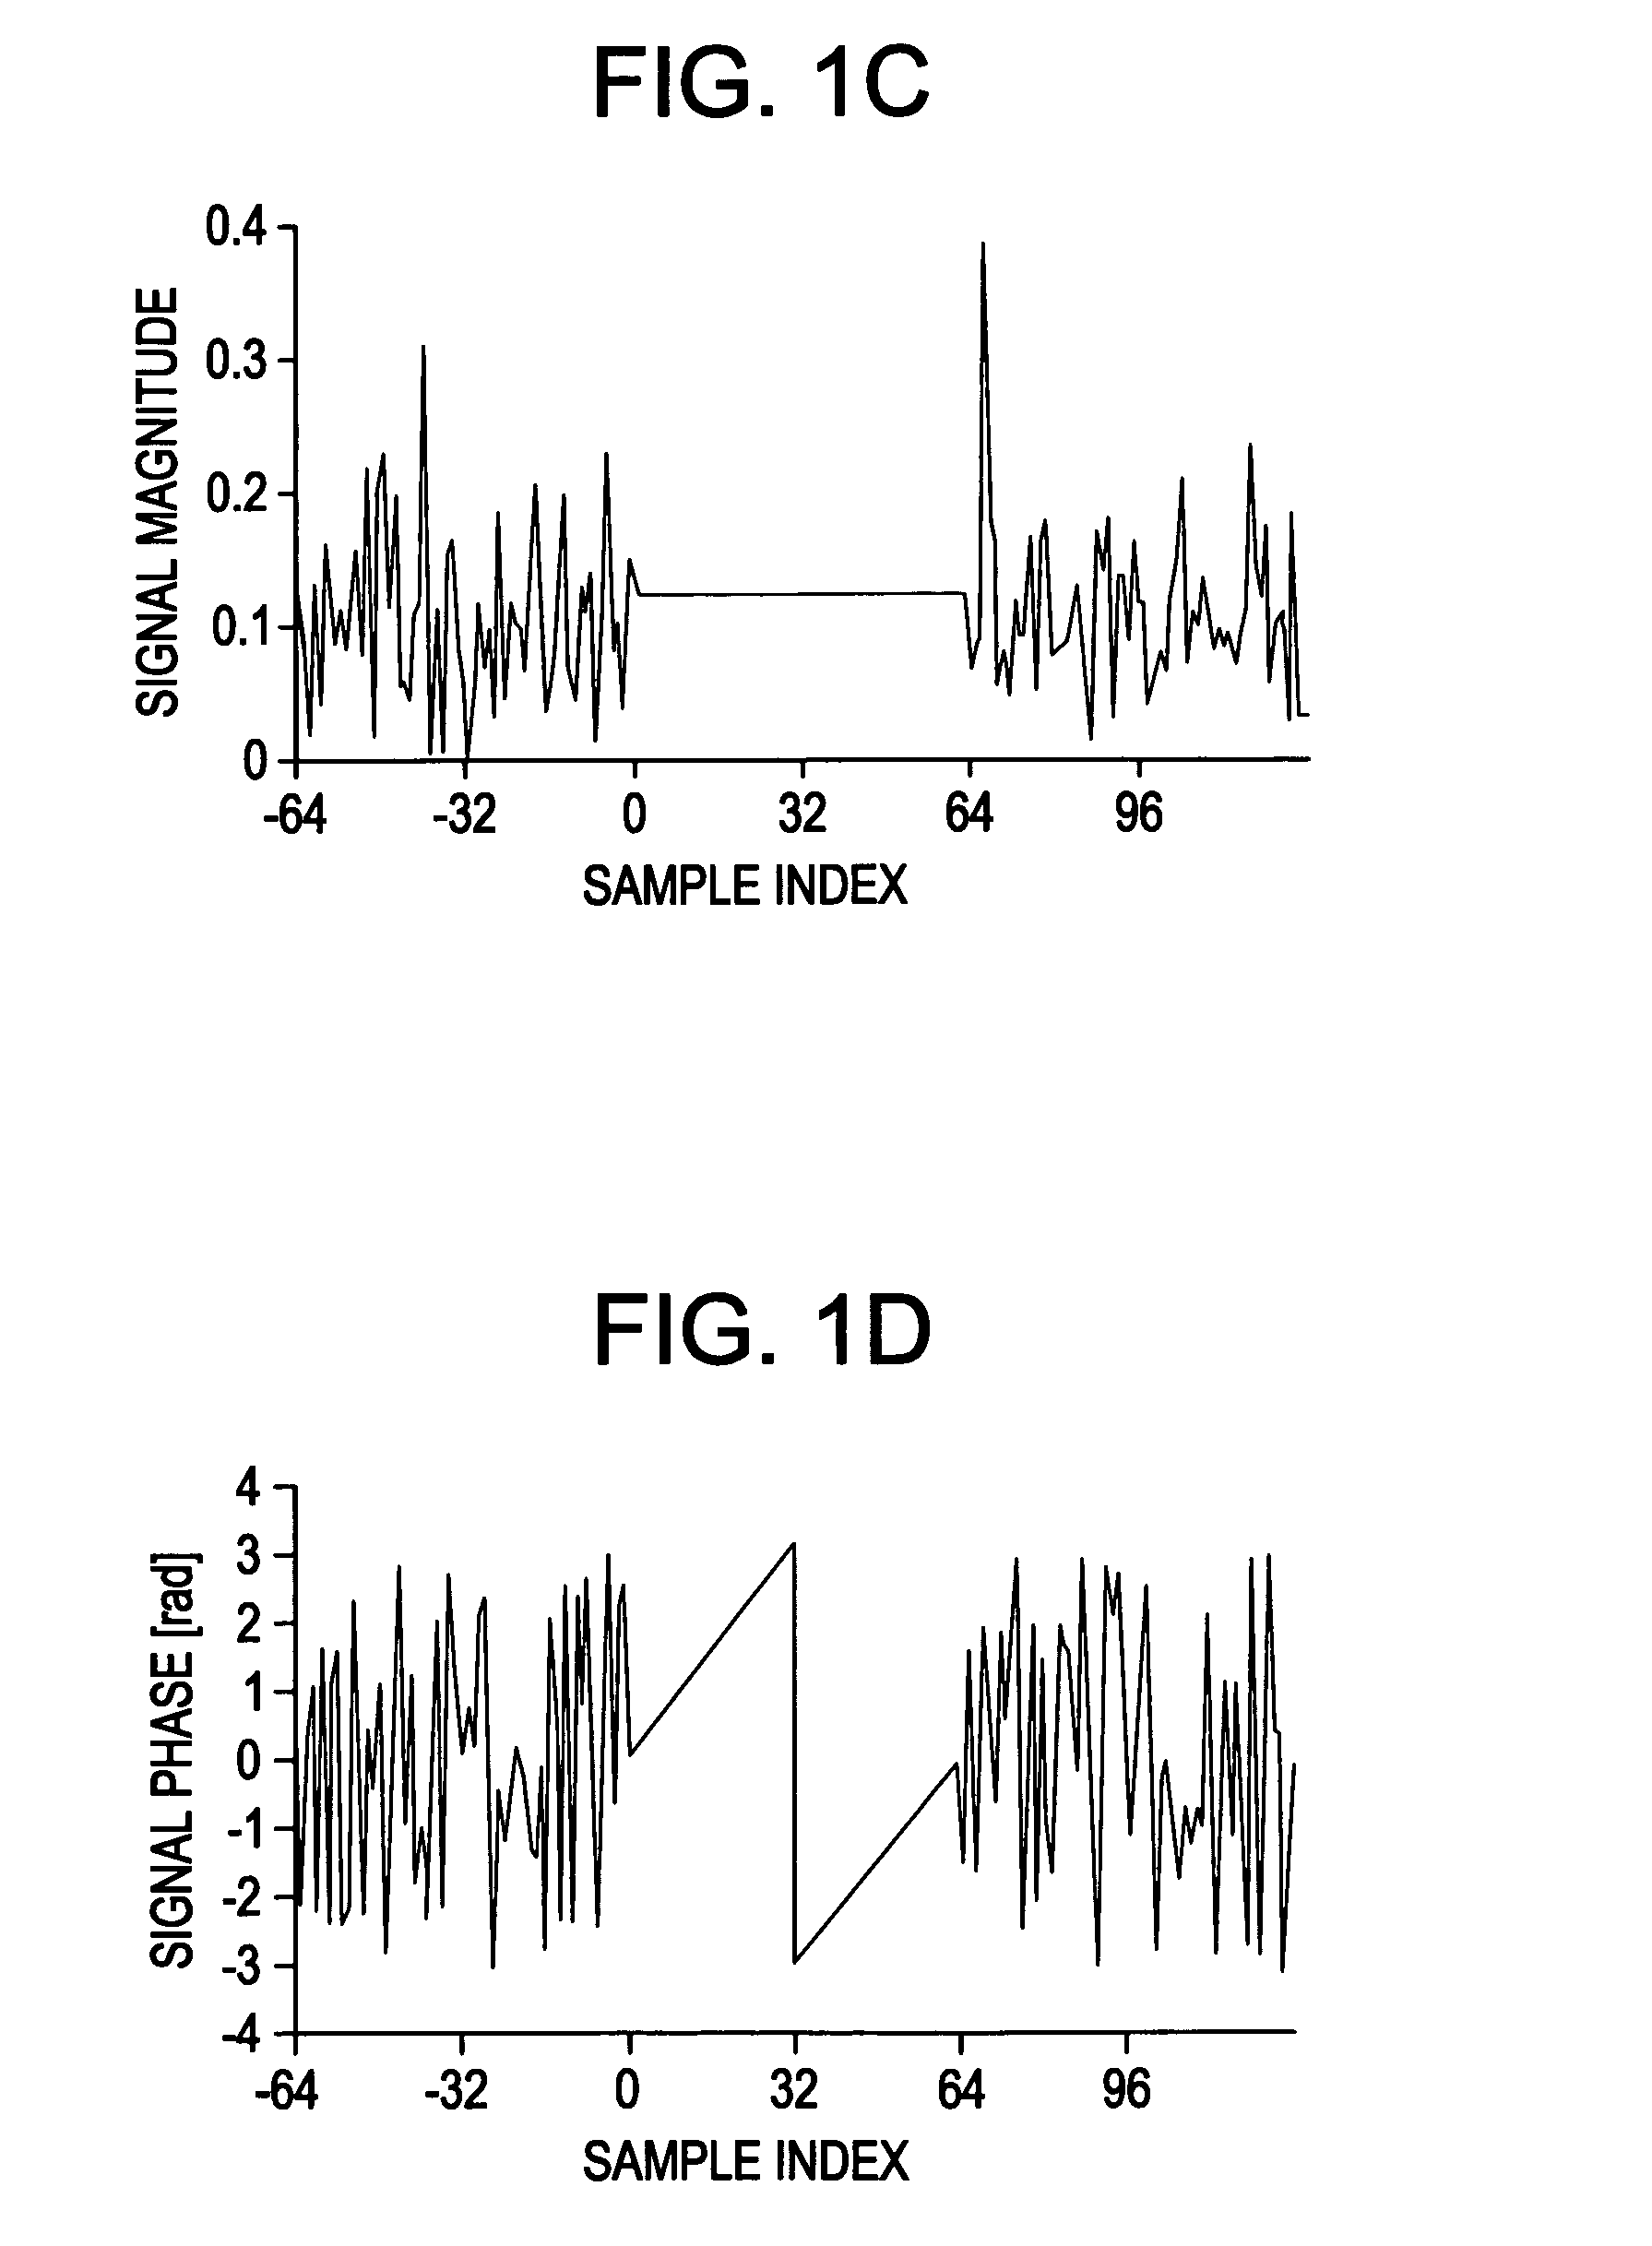 Timing and frequency offset estimation scheme for OFDM systems by using an analytic tone